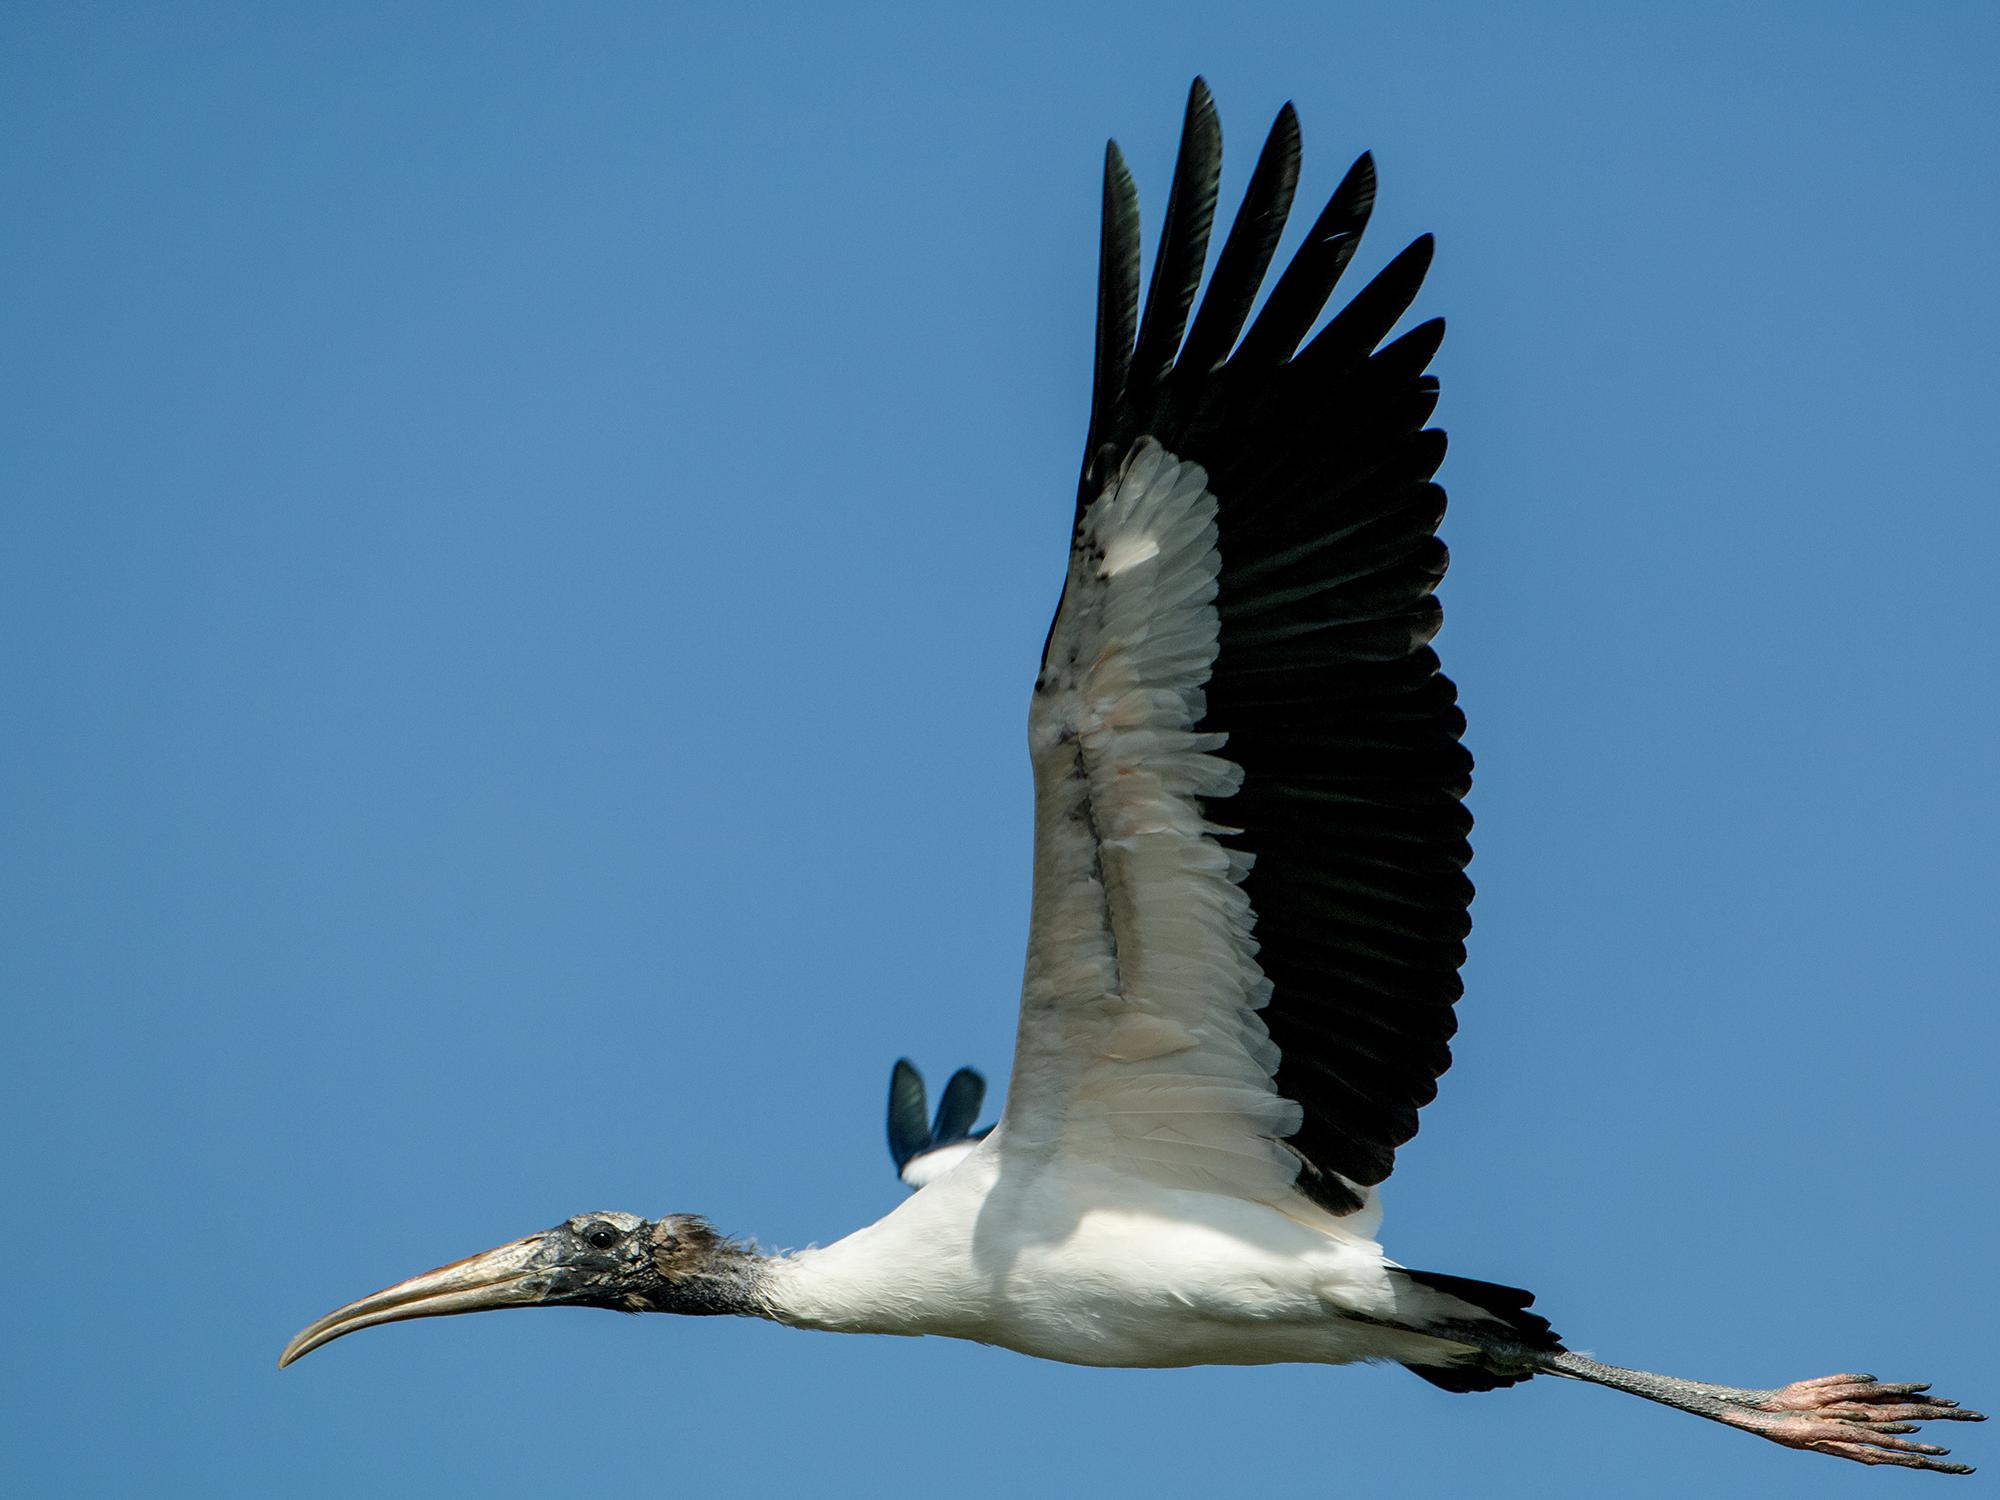 Wood storks stand out in the sky with their long wingspans, black-and-white color patterns and slow wing beats. (Photo by Bill Stripling).  